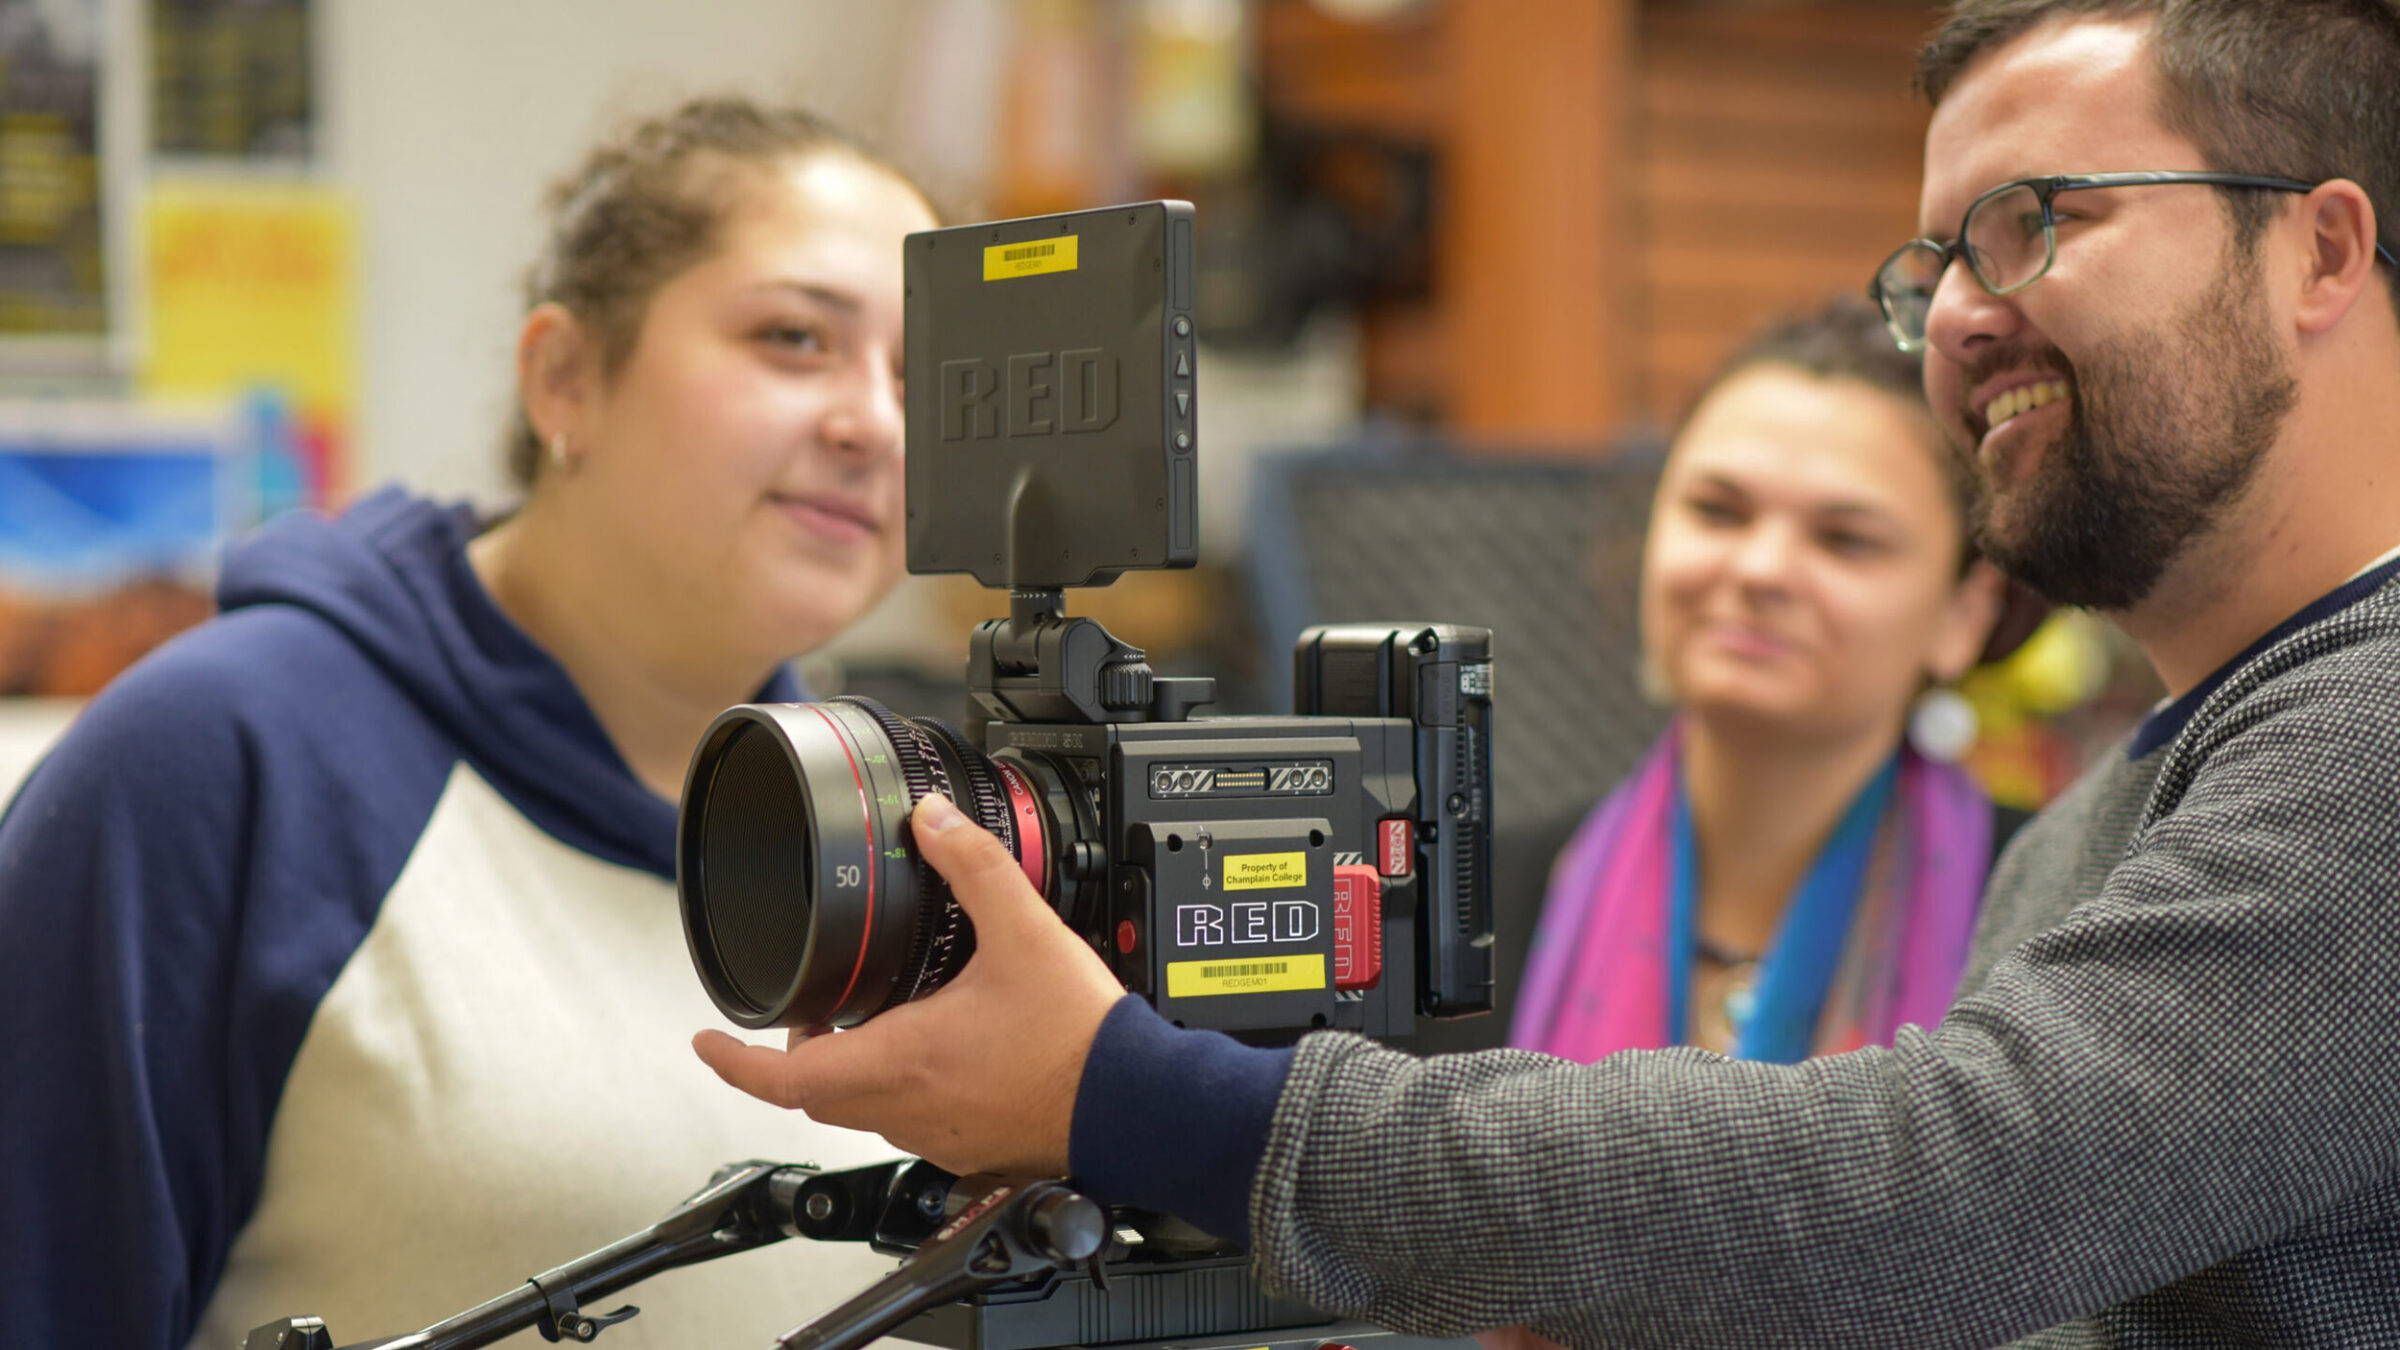 a professor shows two students a "red" camera